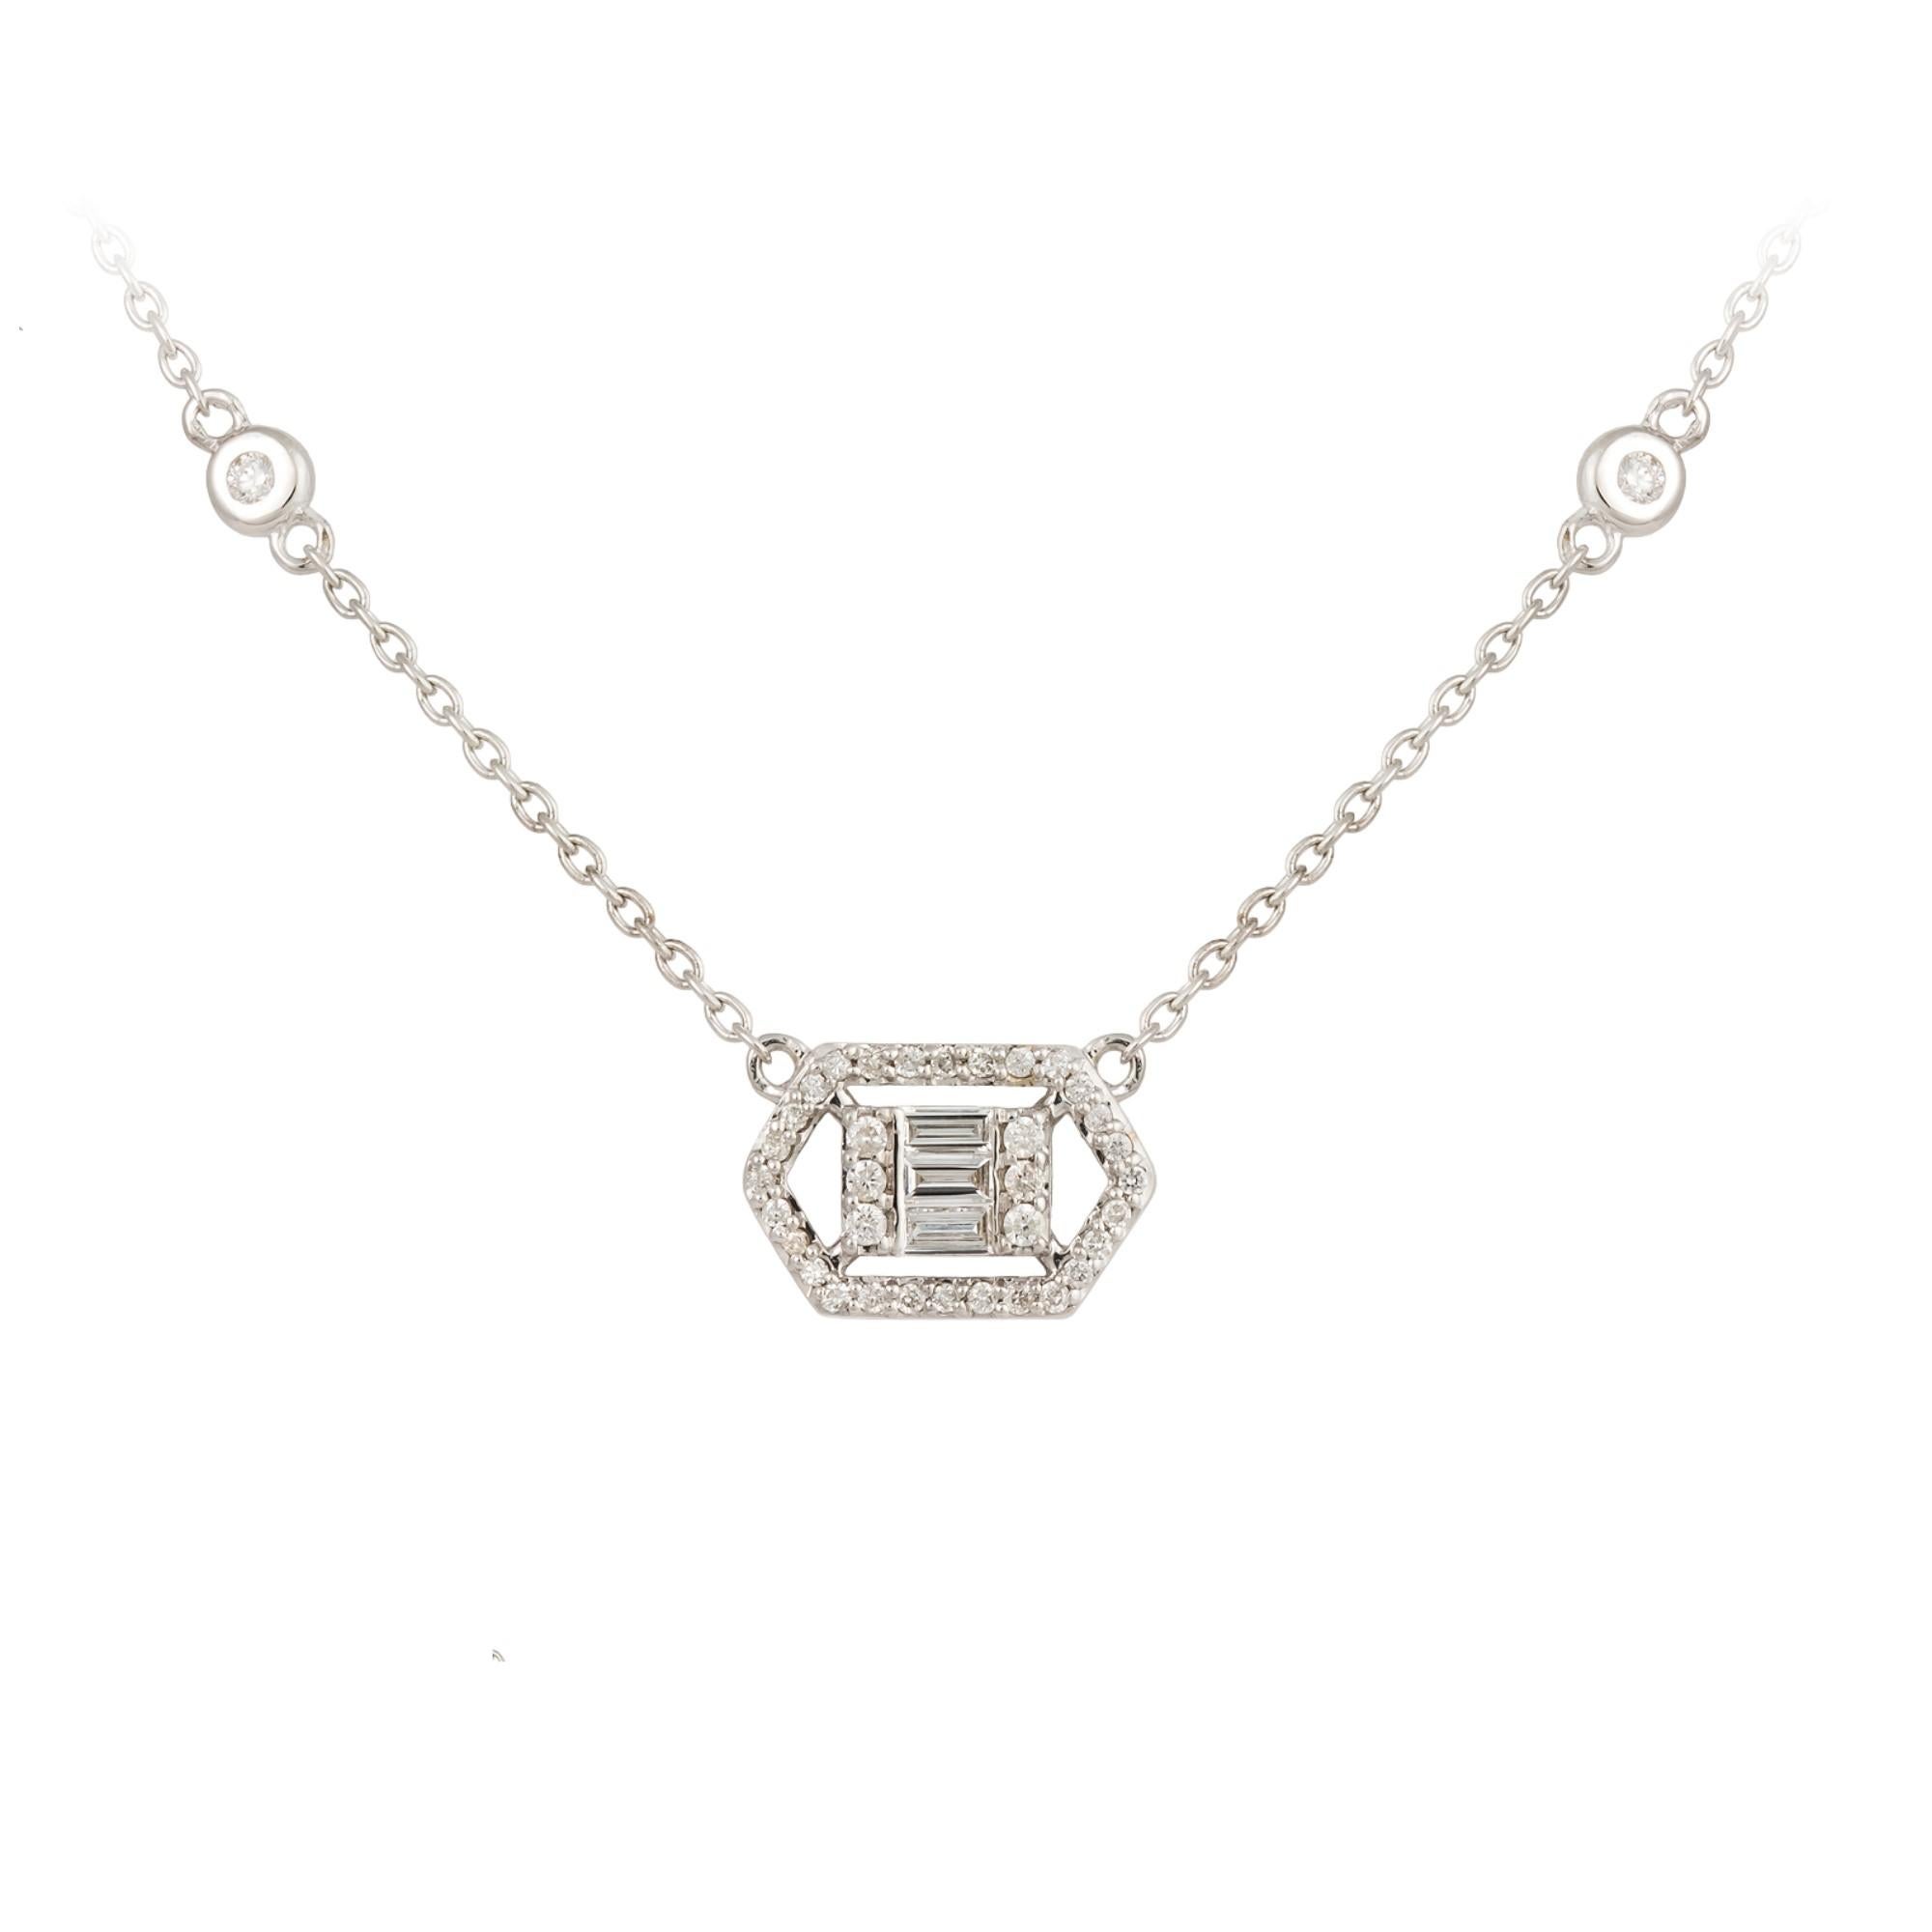 The Following Item we are offering is this Beautiful Rare Important 18KT Gold White Gold Diamond Solitaire Pendant Necklace. Necklace is comprised of .30 Carats of Fine Glittering Fancy Cut Trillion Baguette and Rounds Diamonds. This Beautiful